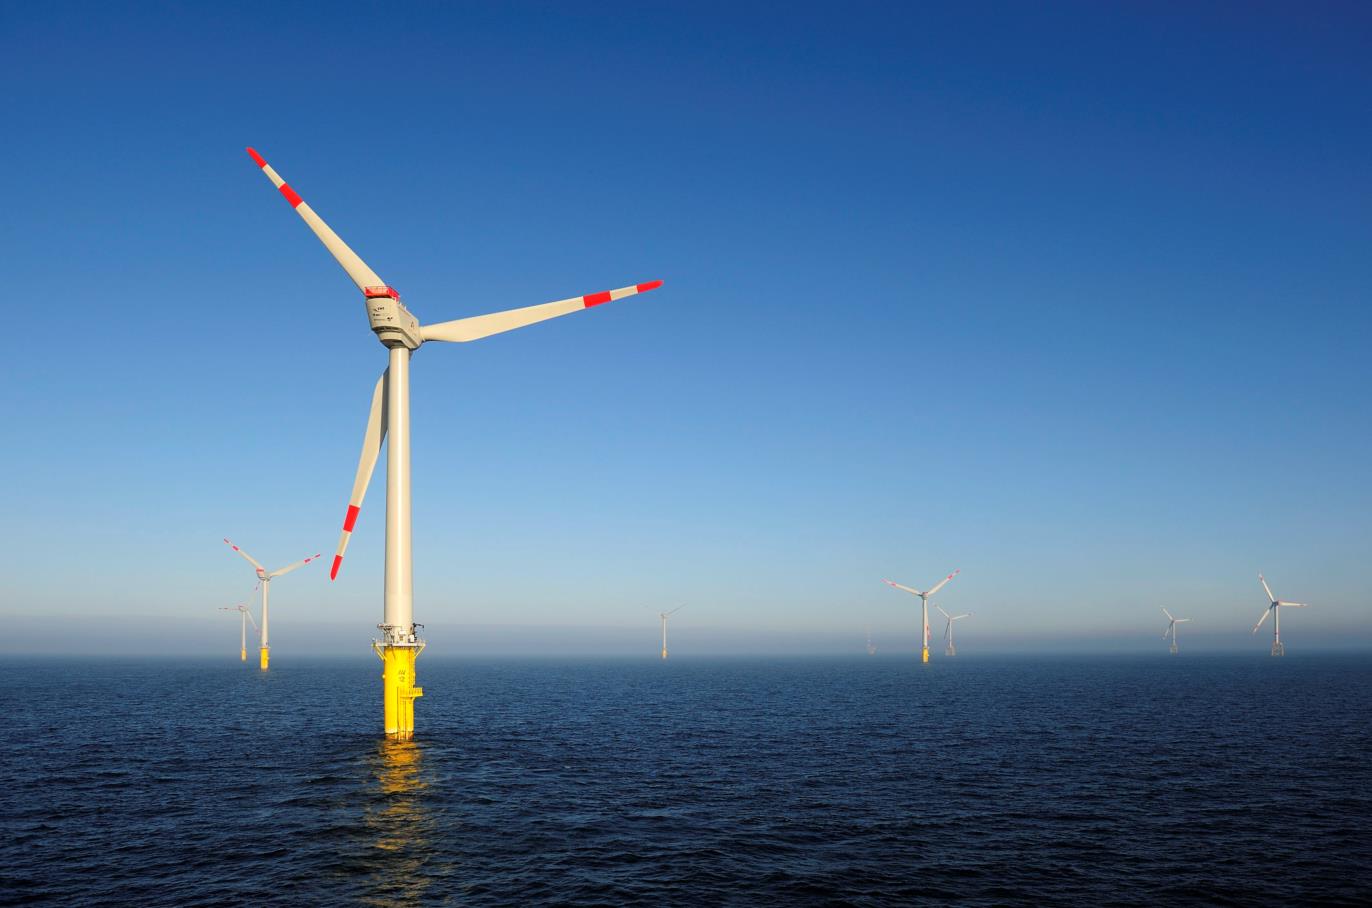 GlobalData UK's Offshore Wind to Grow Significantly by 2020